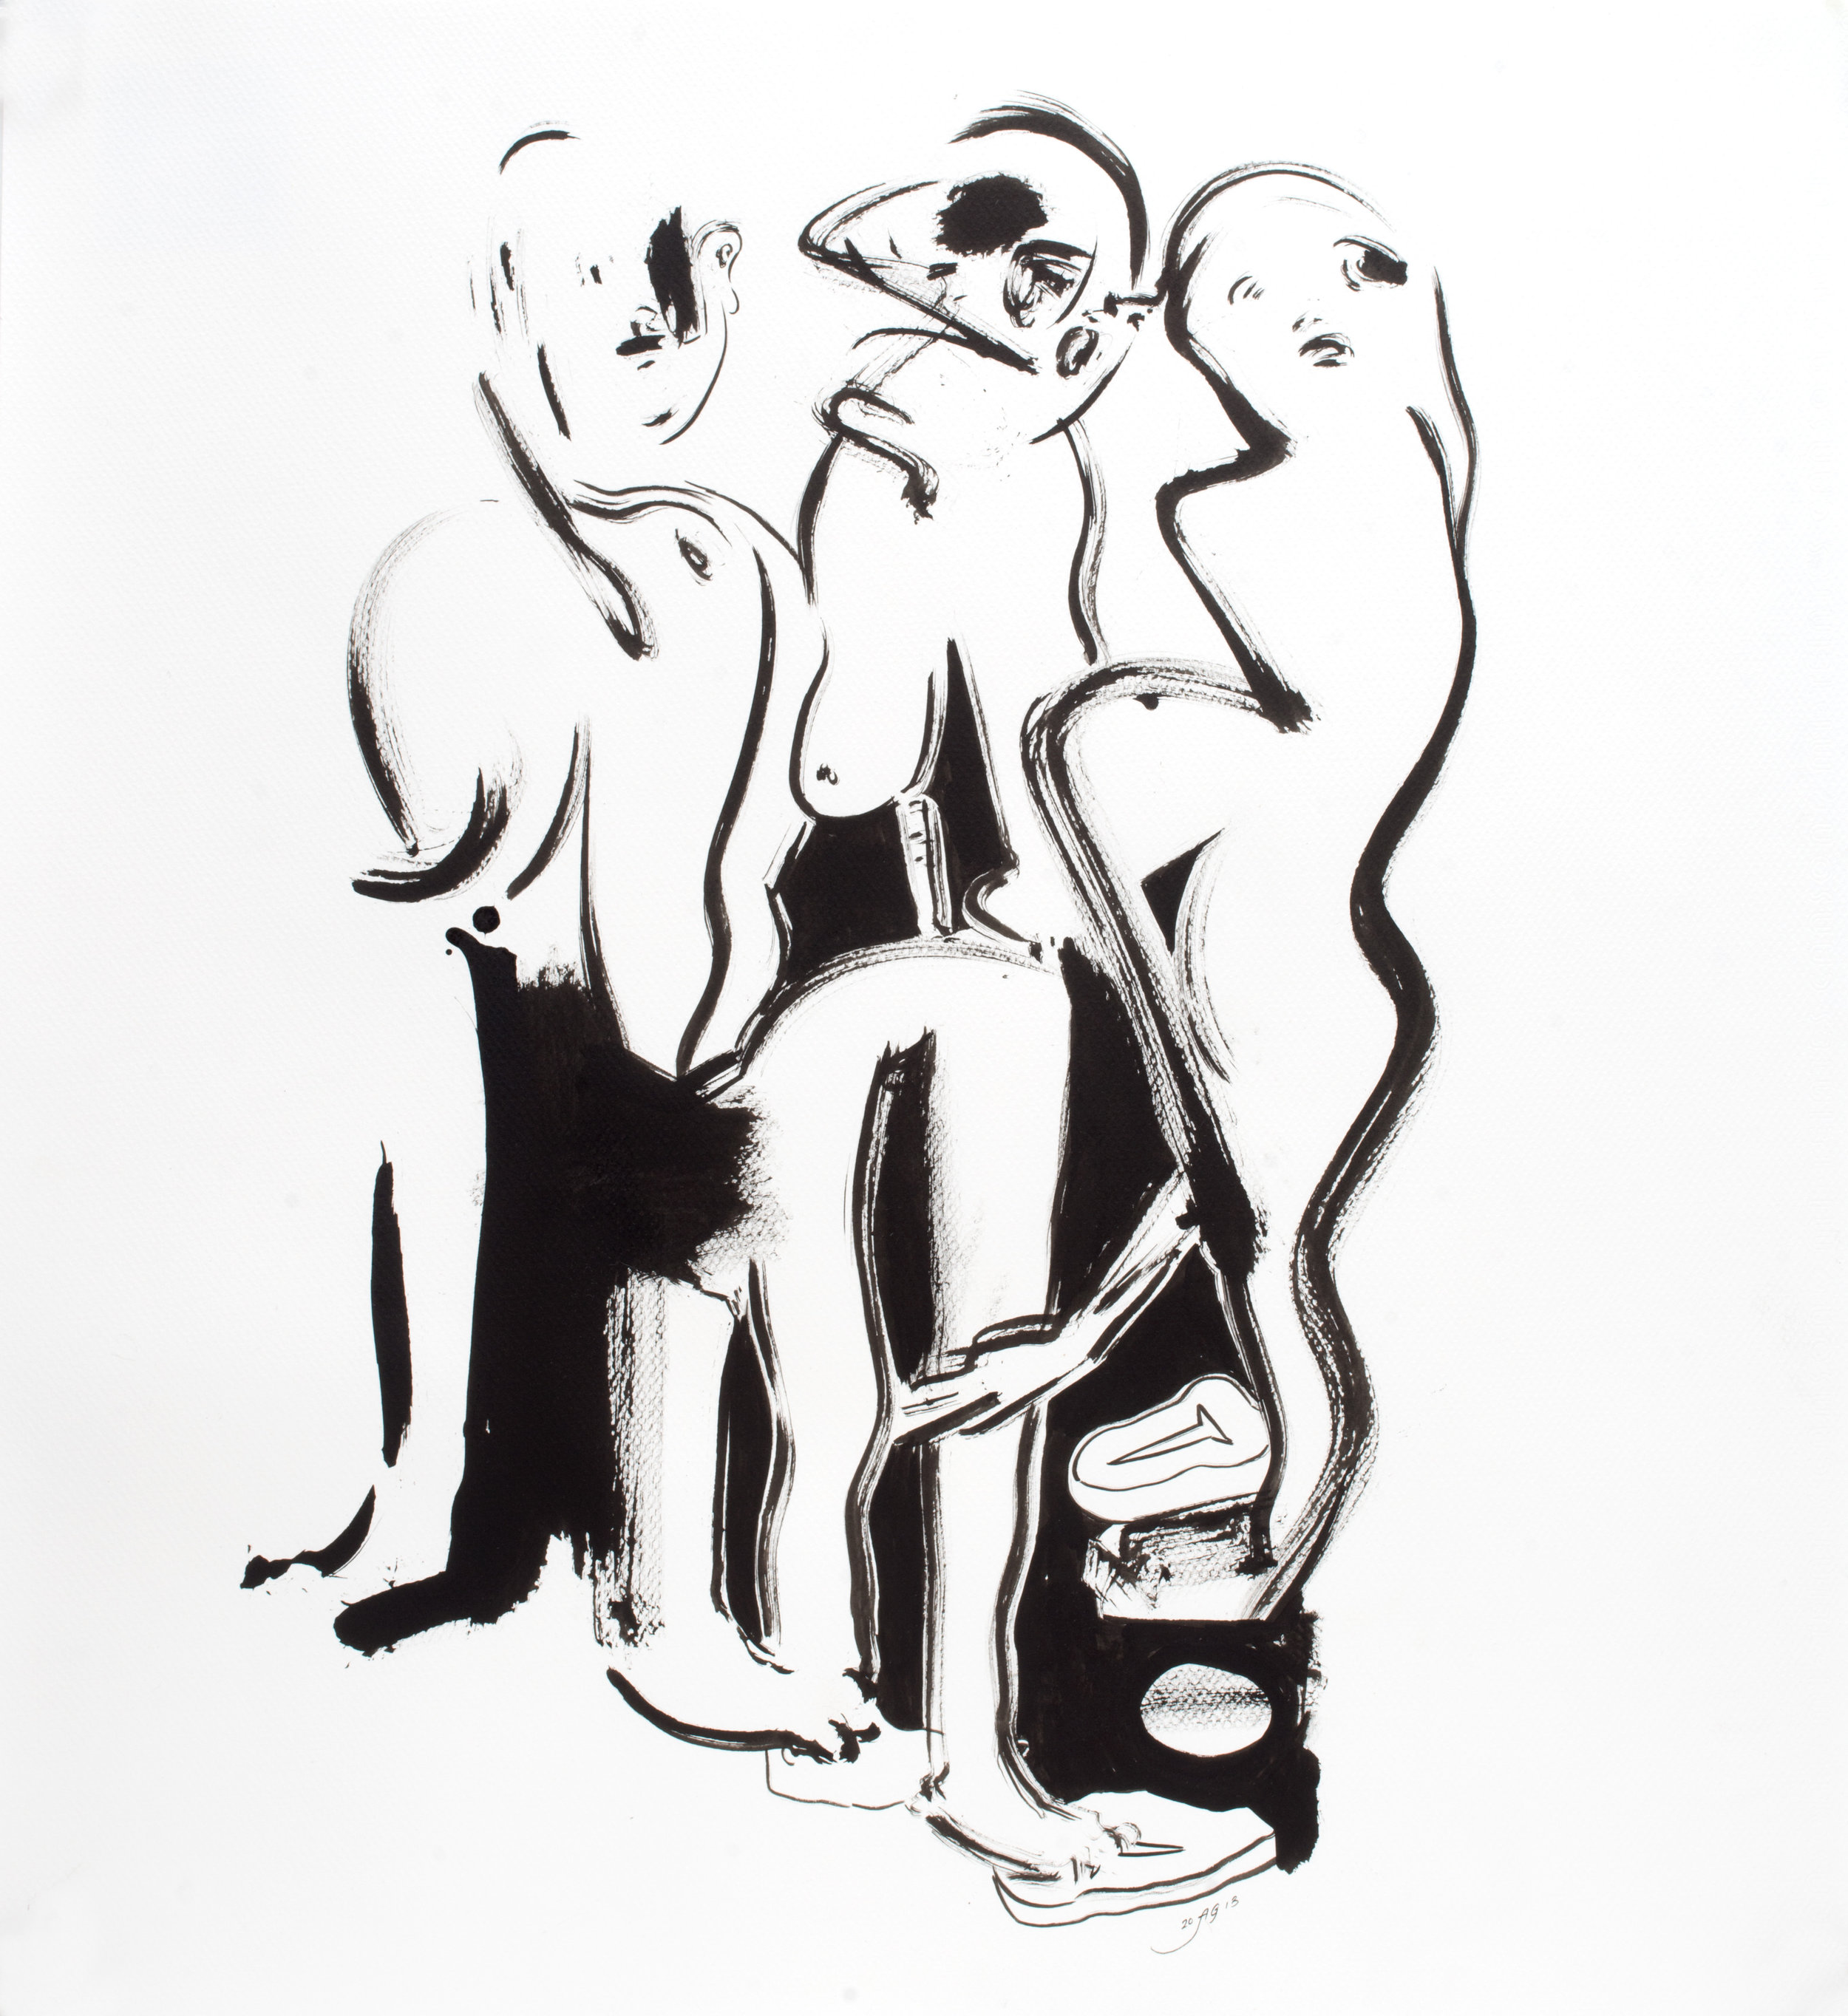   Three Graces , 2013 Ink on paper 22 x 21 inches 